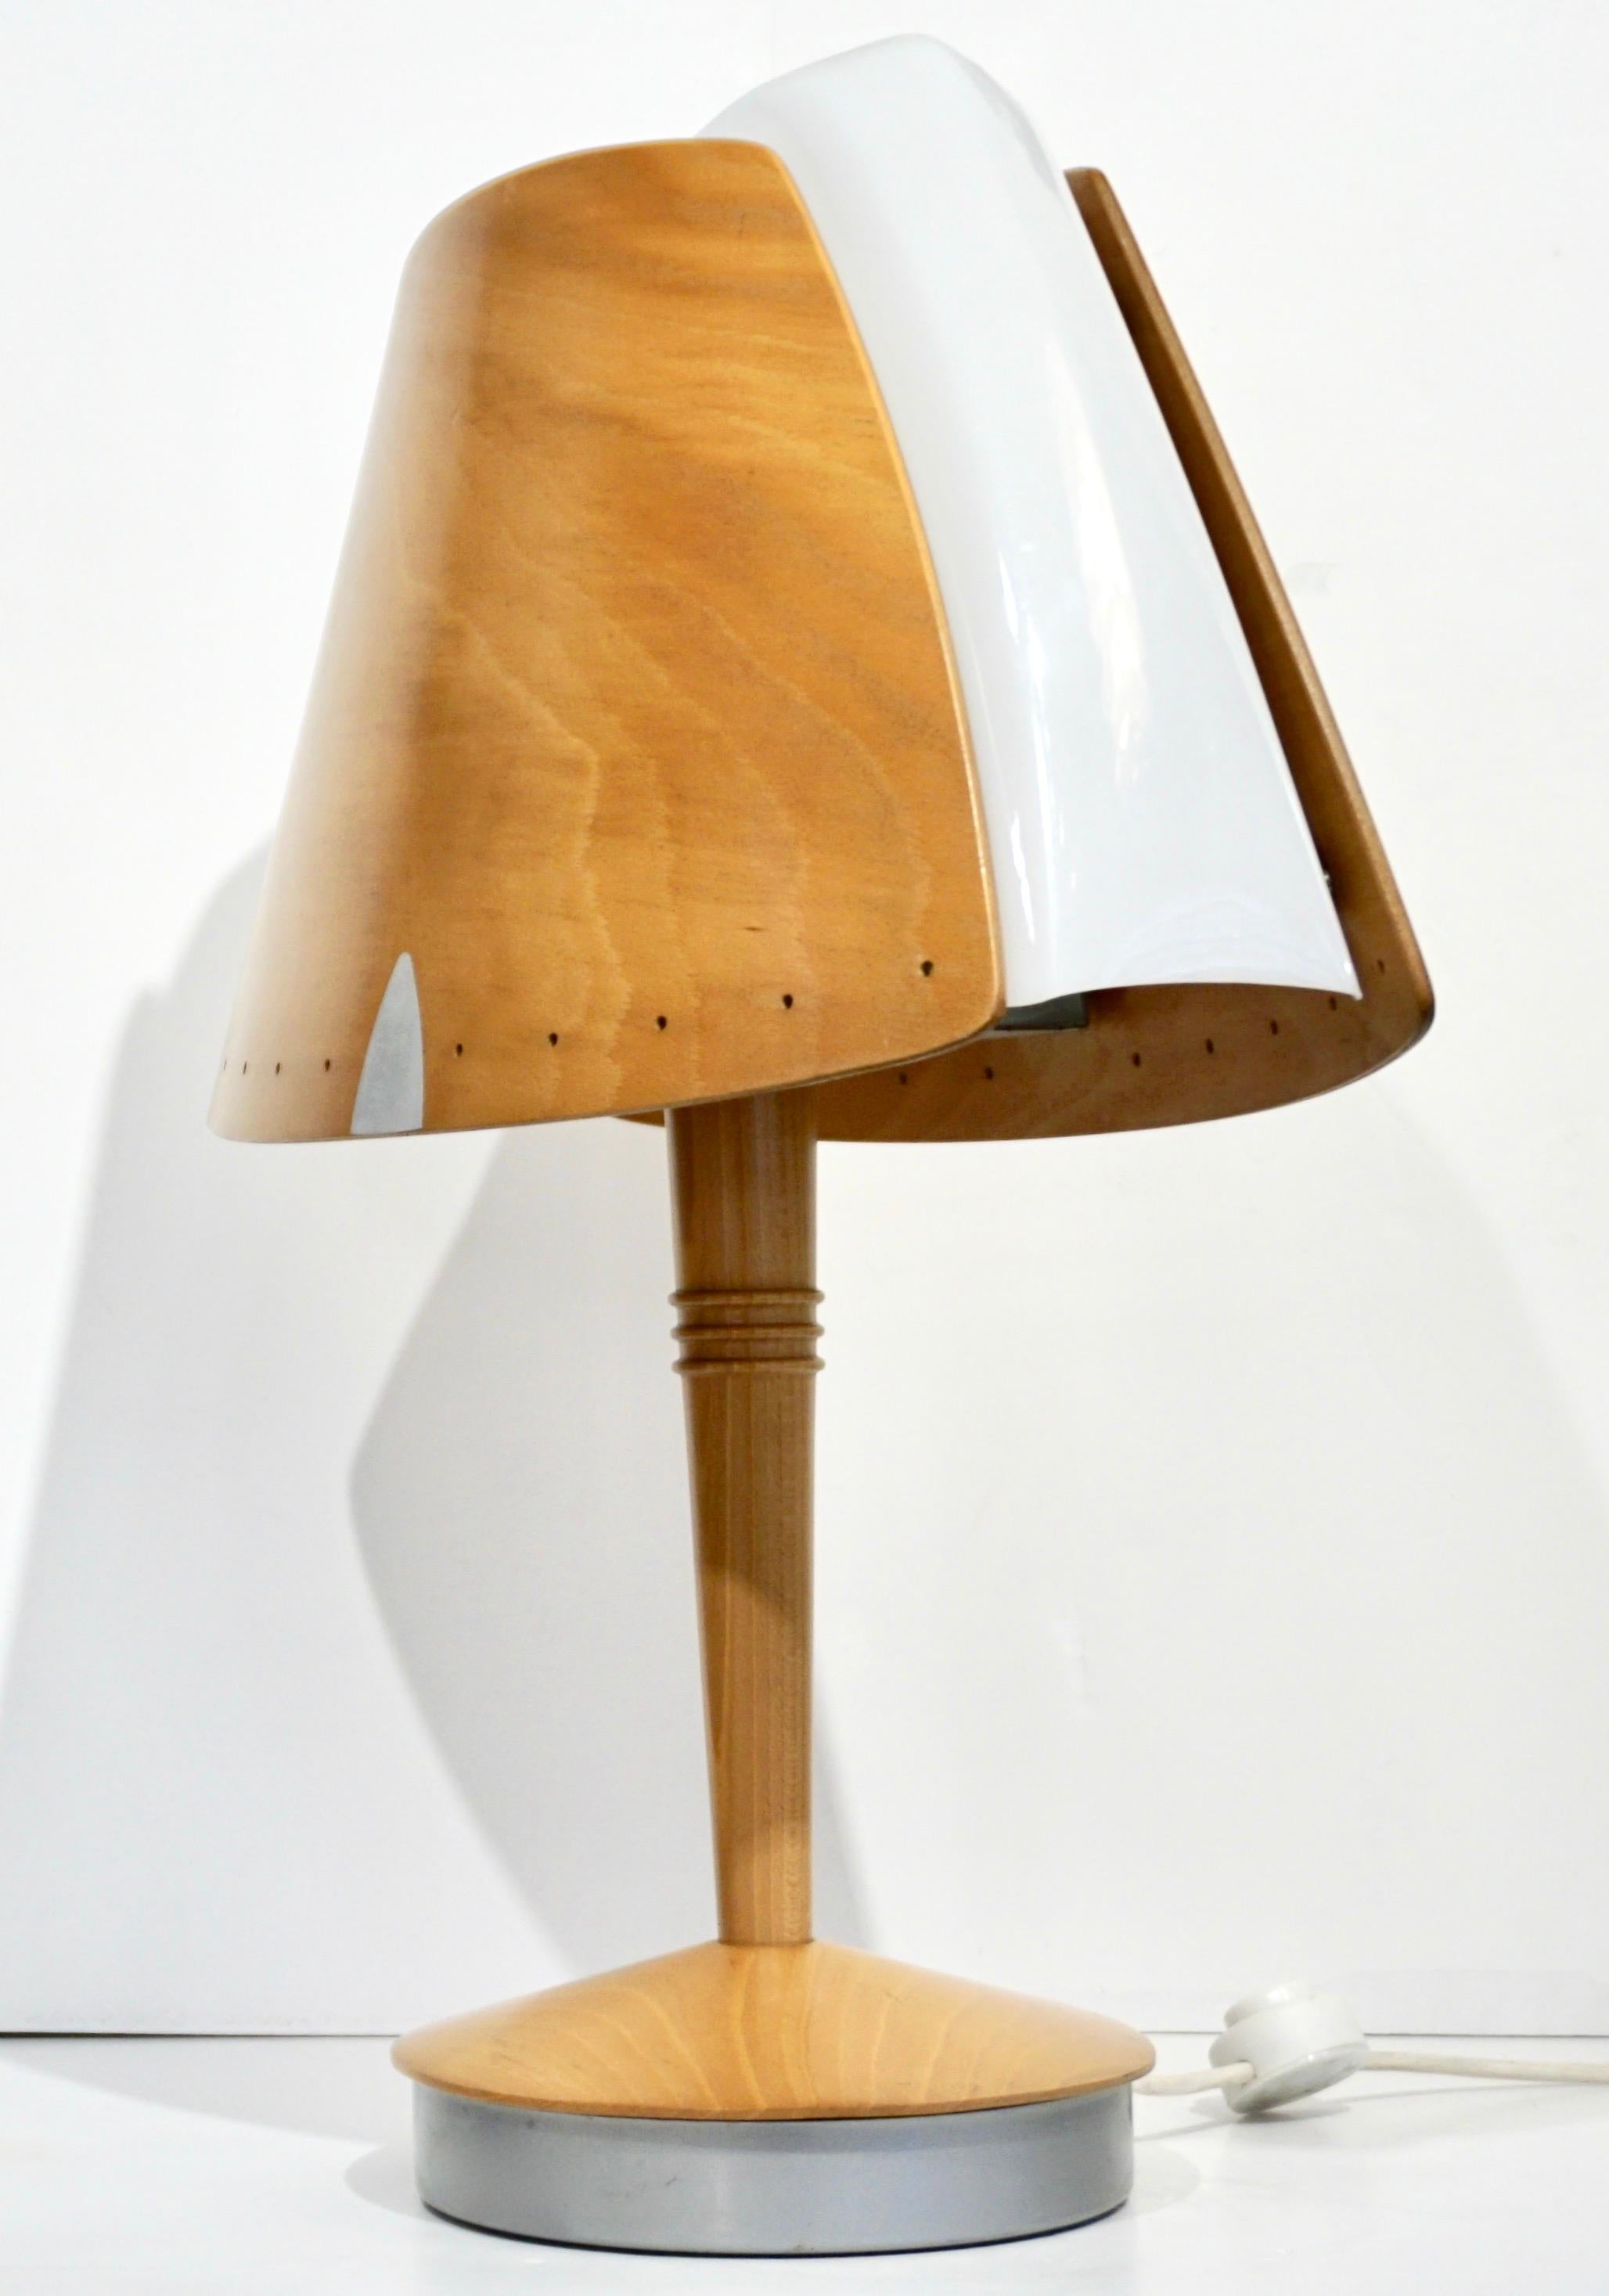 Brushed 1970 French Vintage Birch Wood and Acrylic Table Lamp for Barcelona Hilton Hotel For Sale